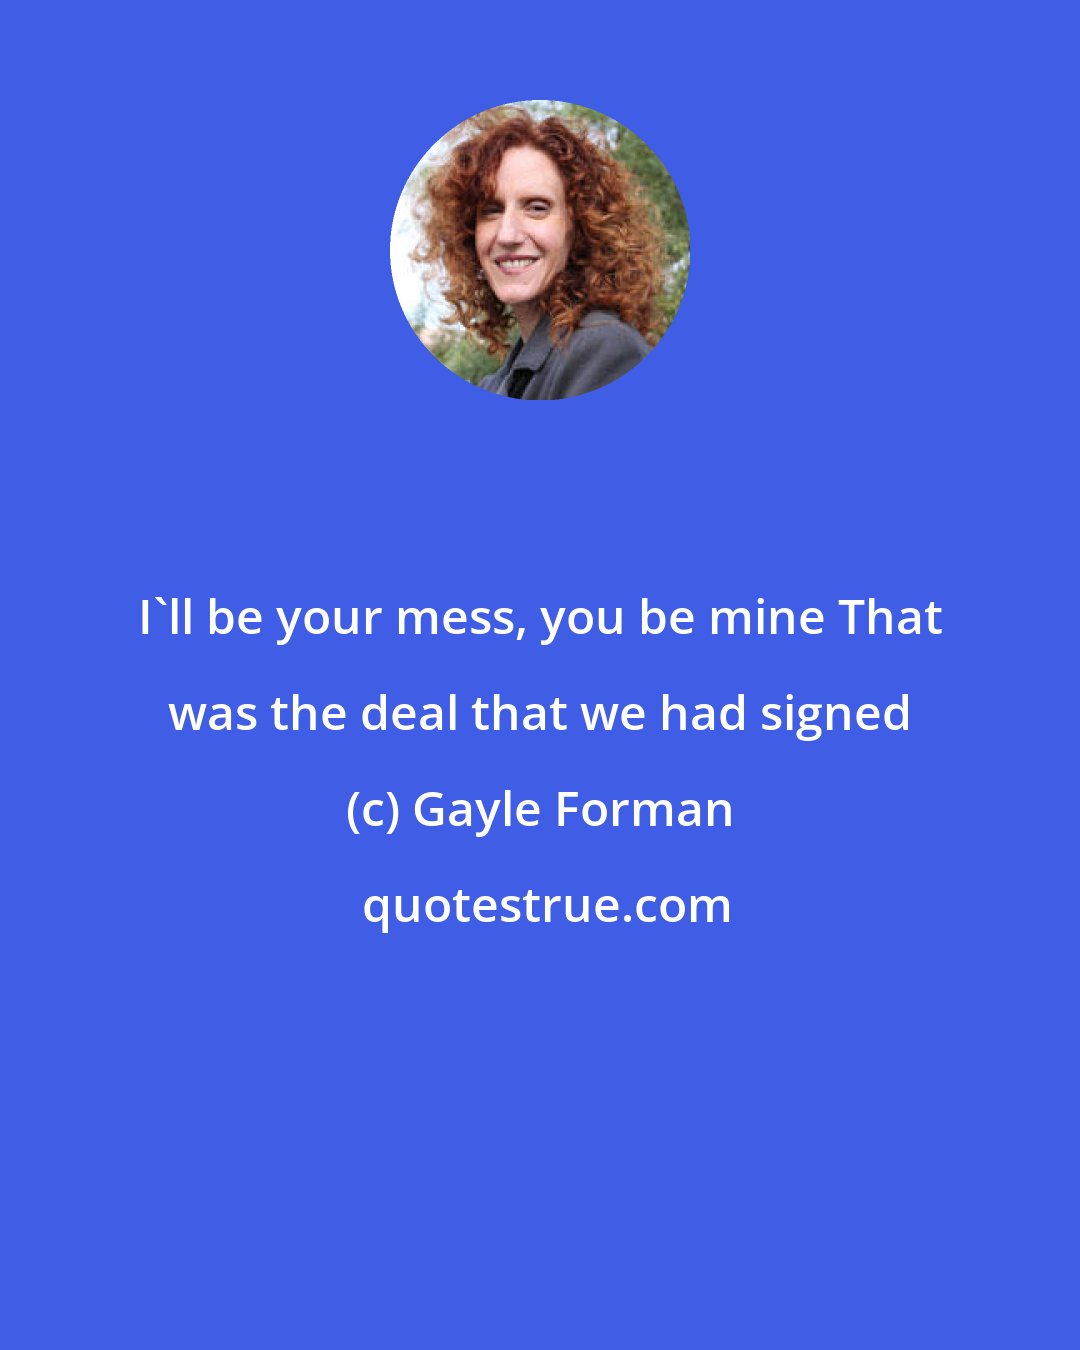 Gayle Forman: I'll be your mess, you be mine That was the deal that we had signed